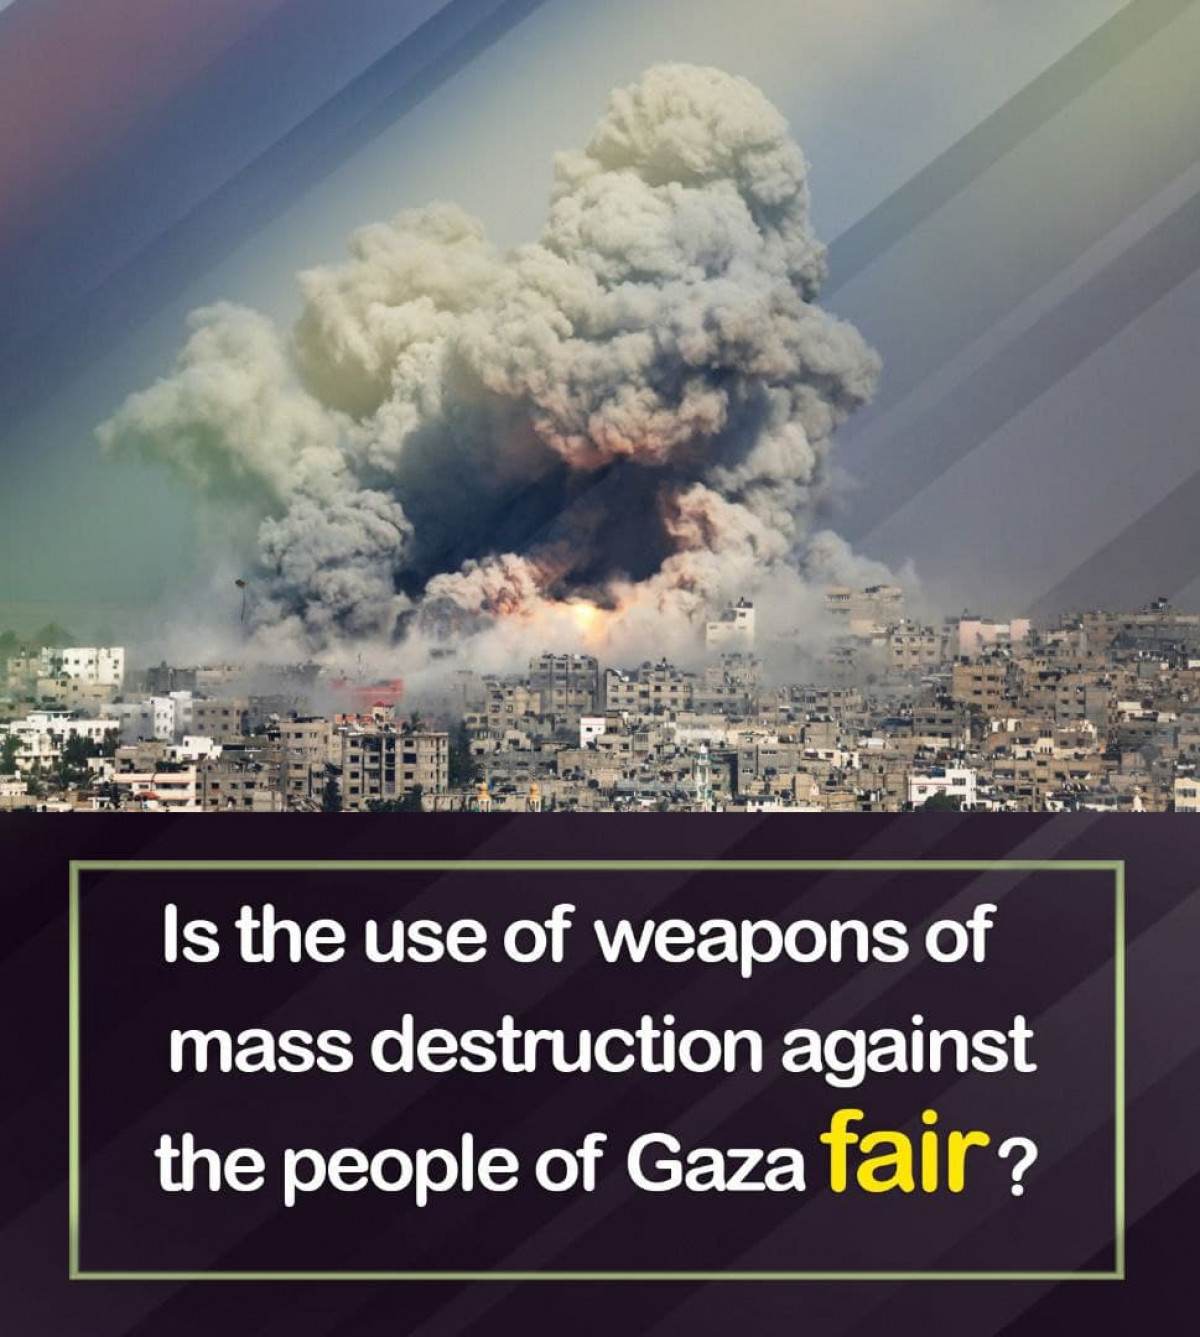 Is the use of weapons of mass destruction against the people of Gaza fair?